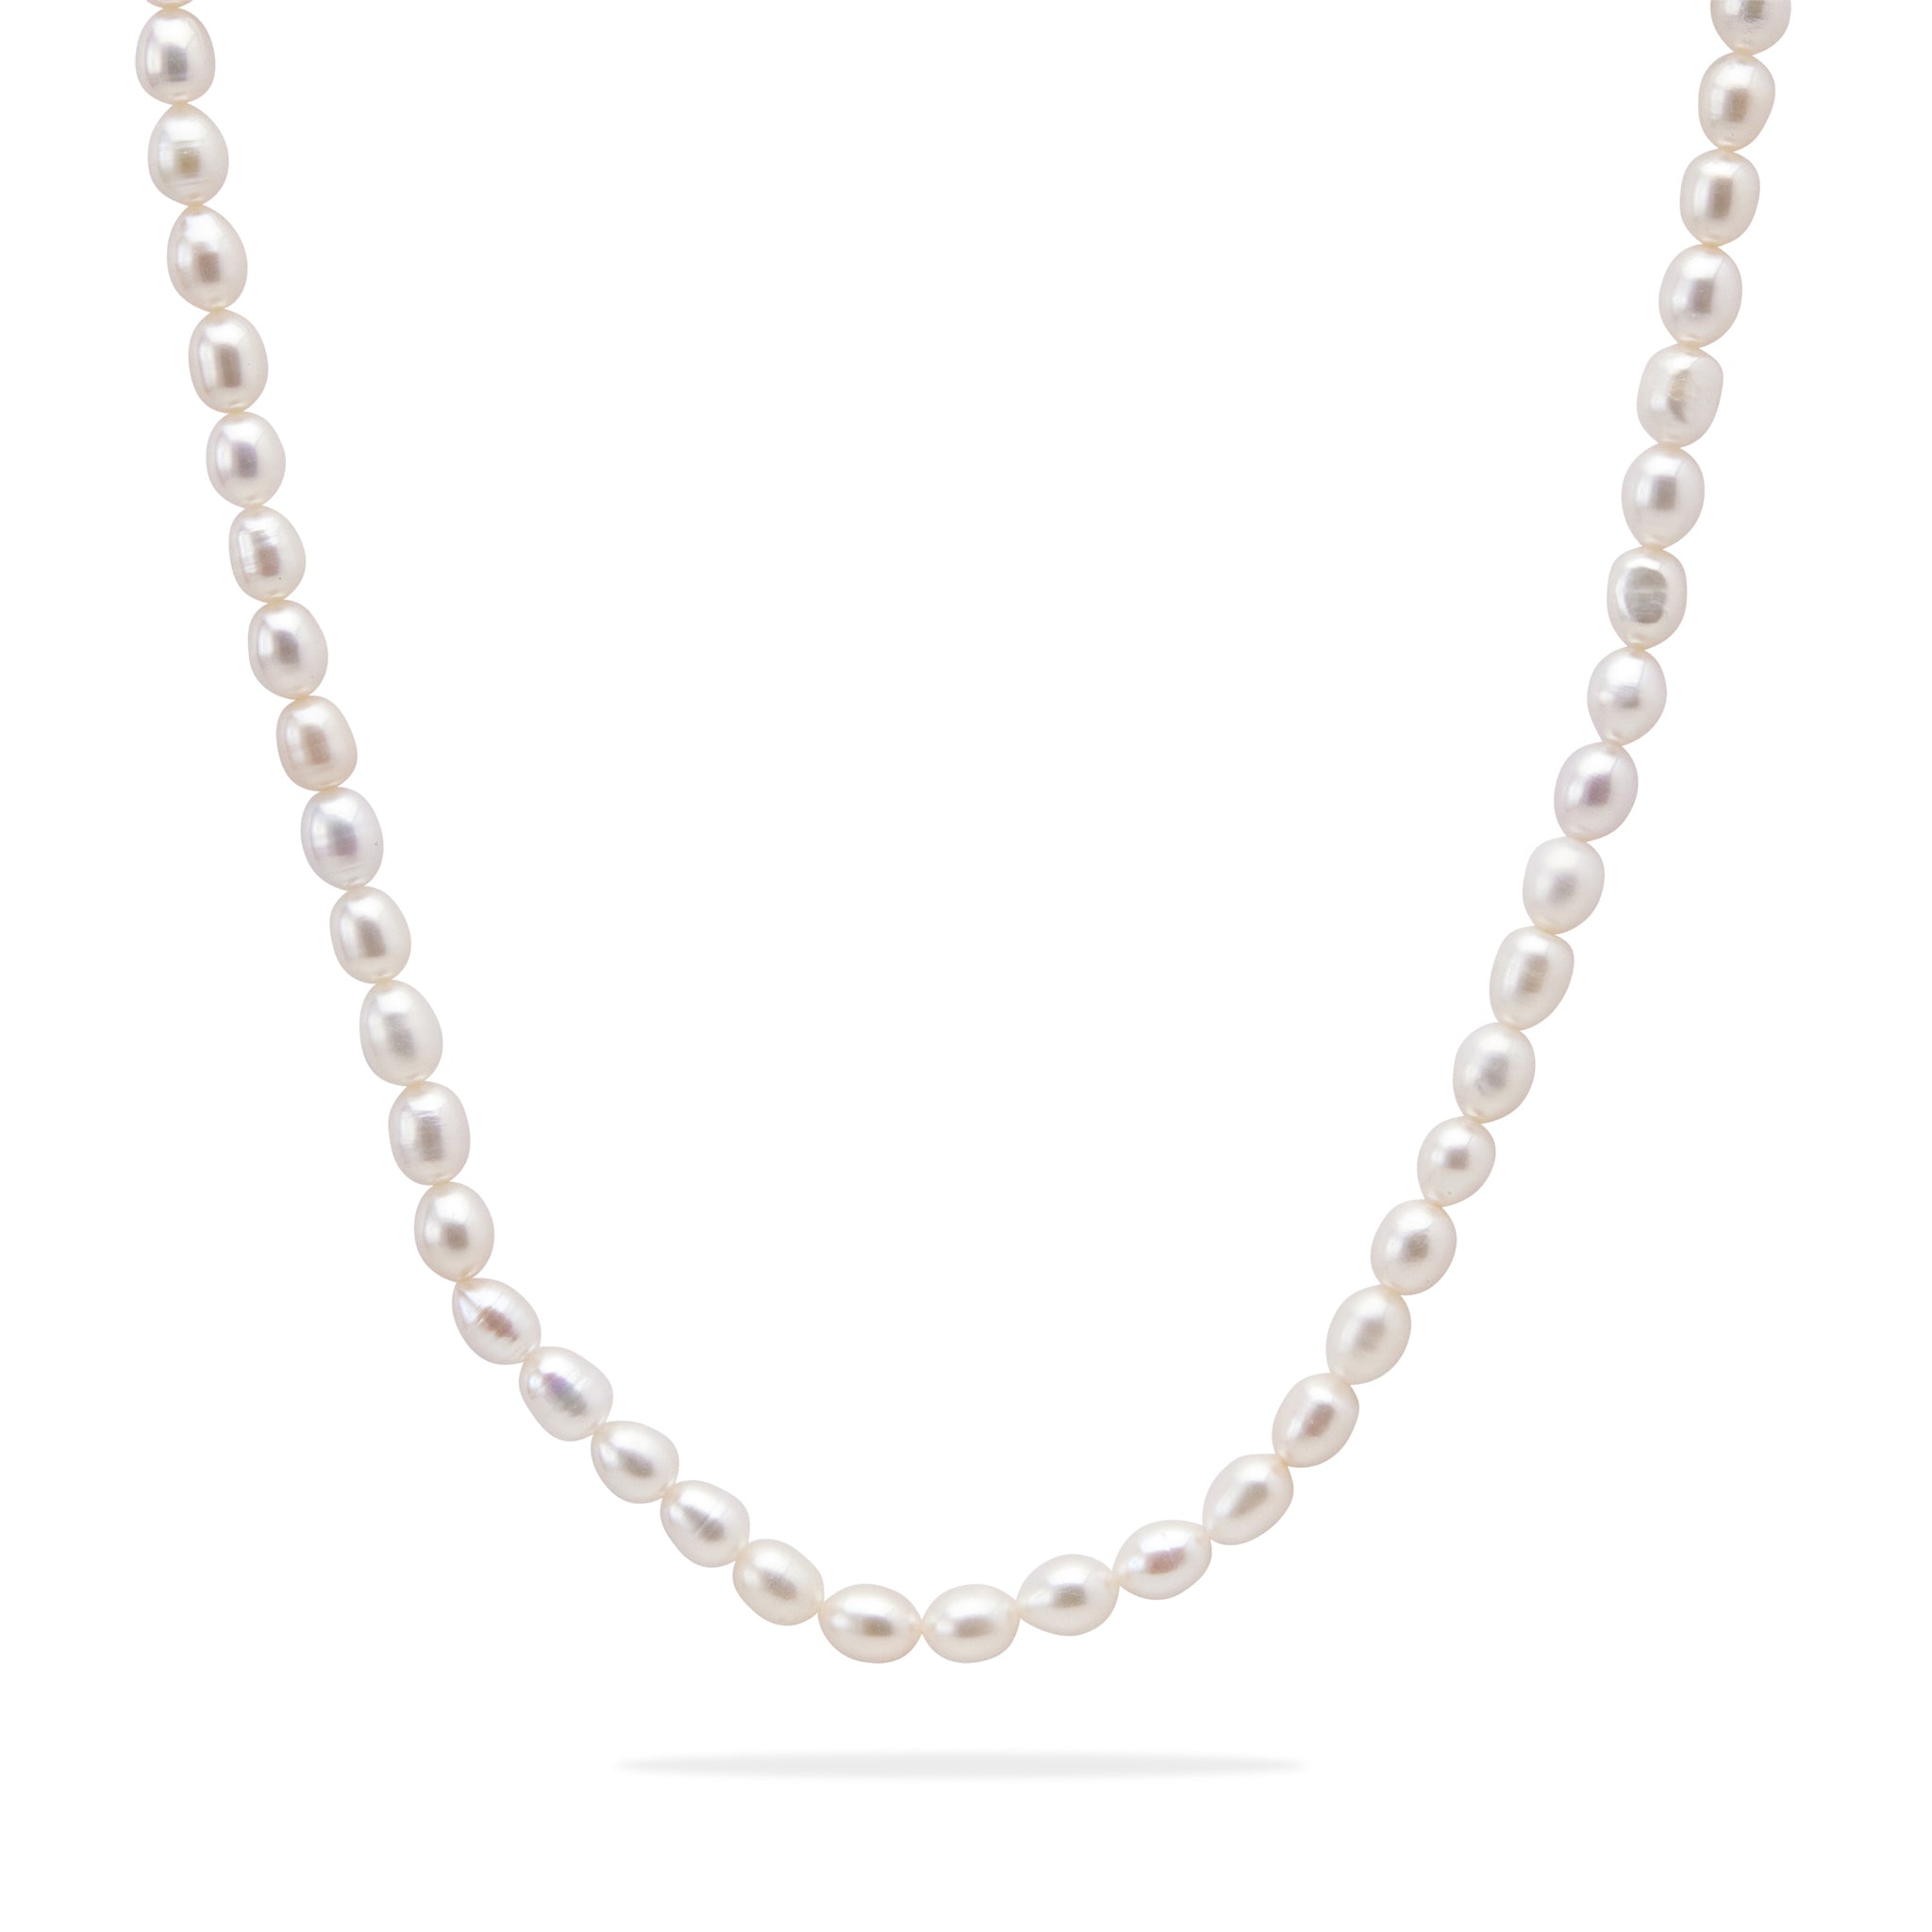 Pearl_Necklace_02.jpg